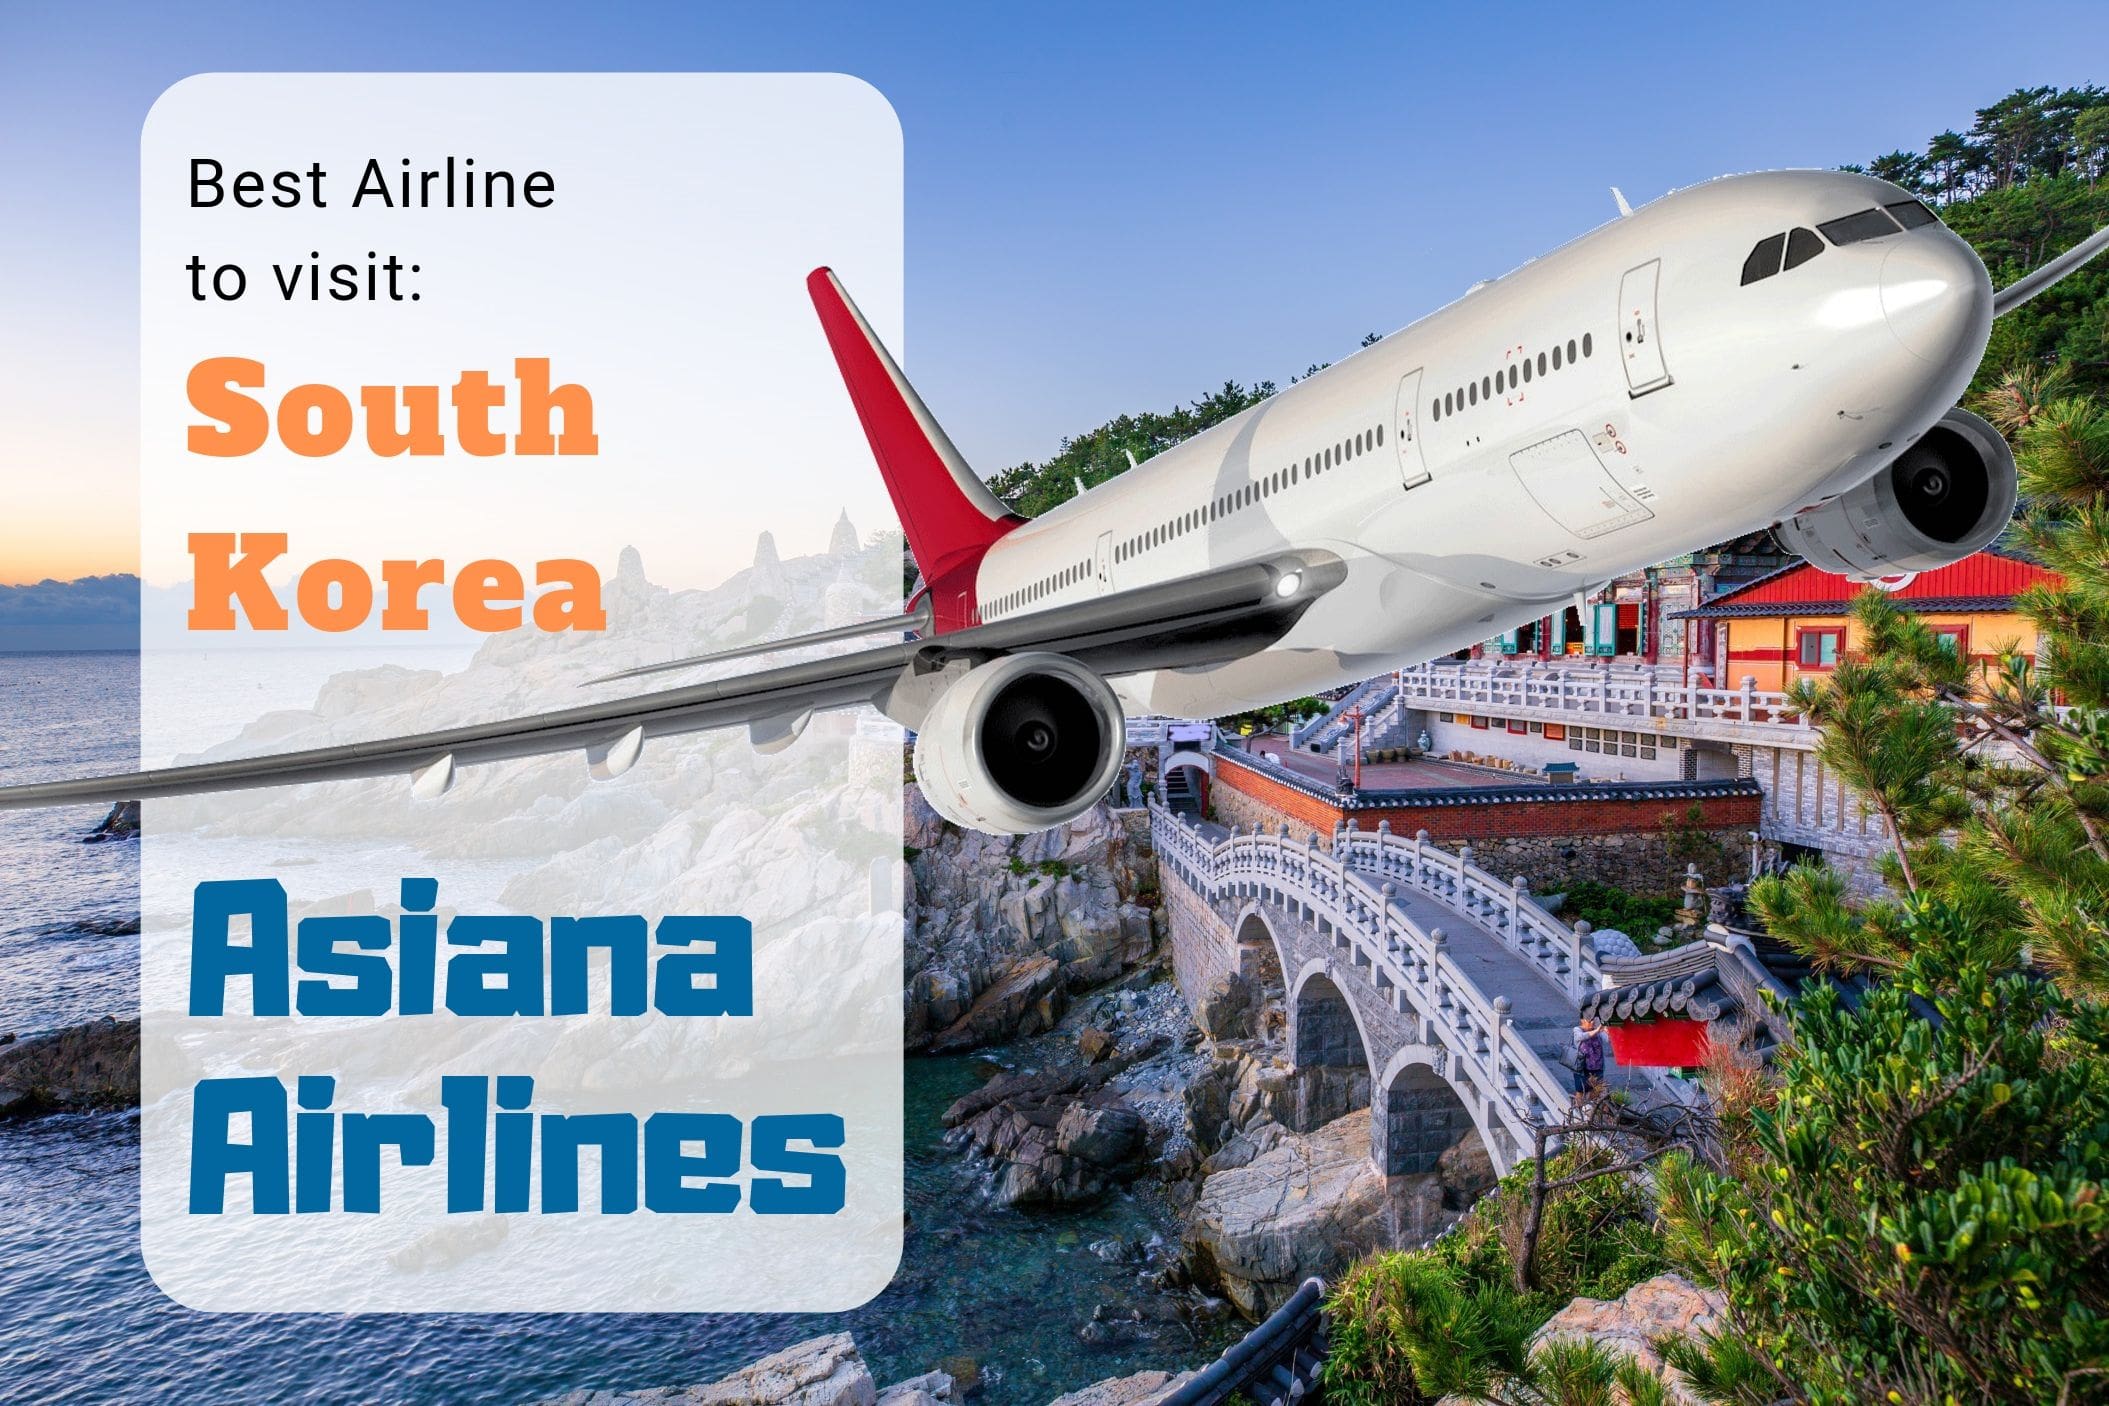 2019-10-23-10-15-182019-09-25-09-41-26Best Airline to visit South Korea-min